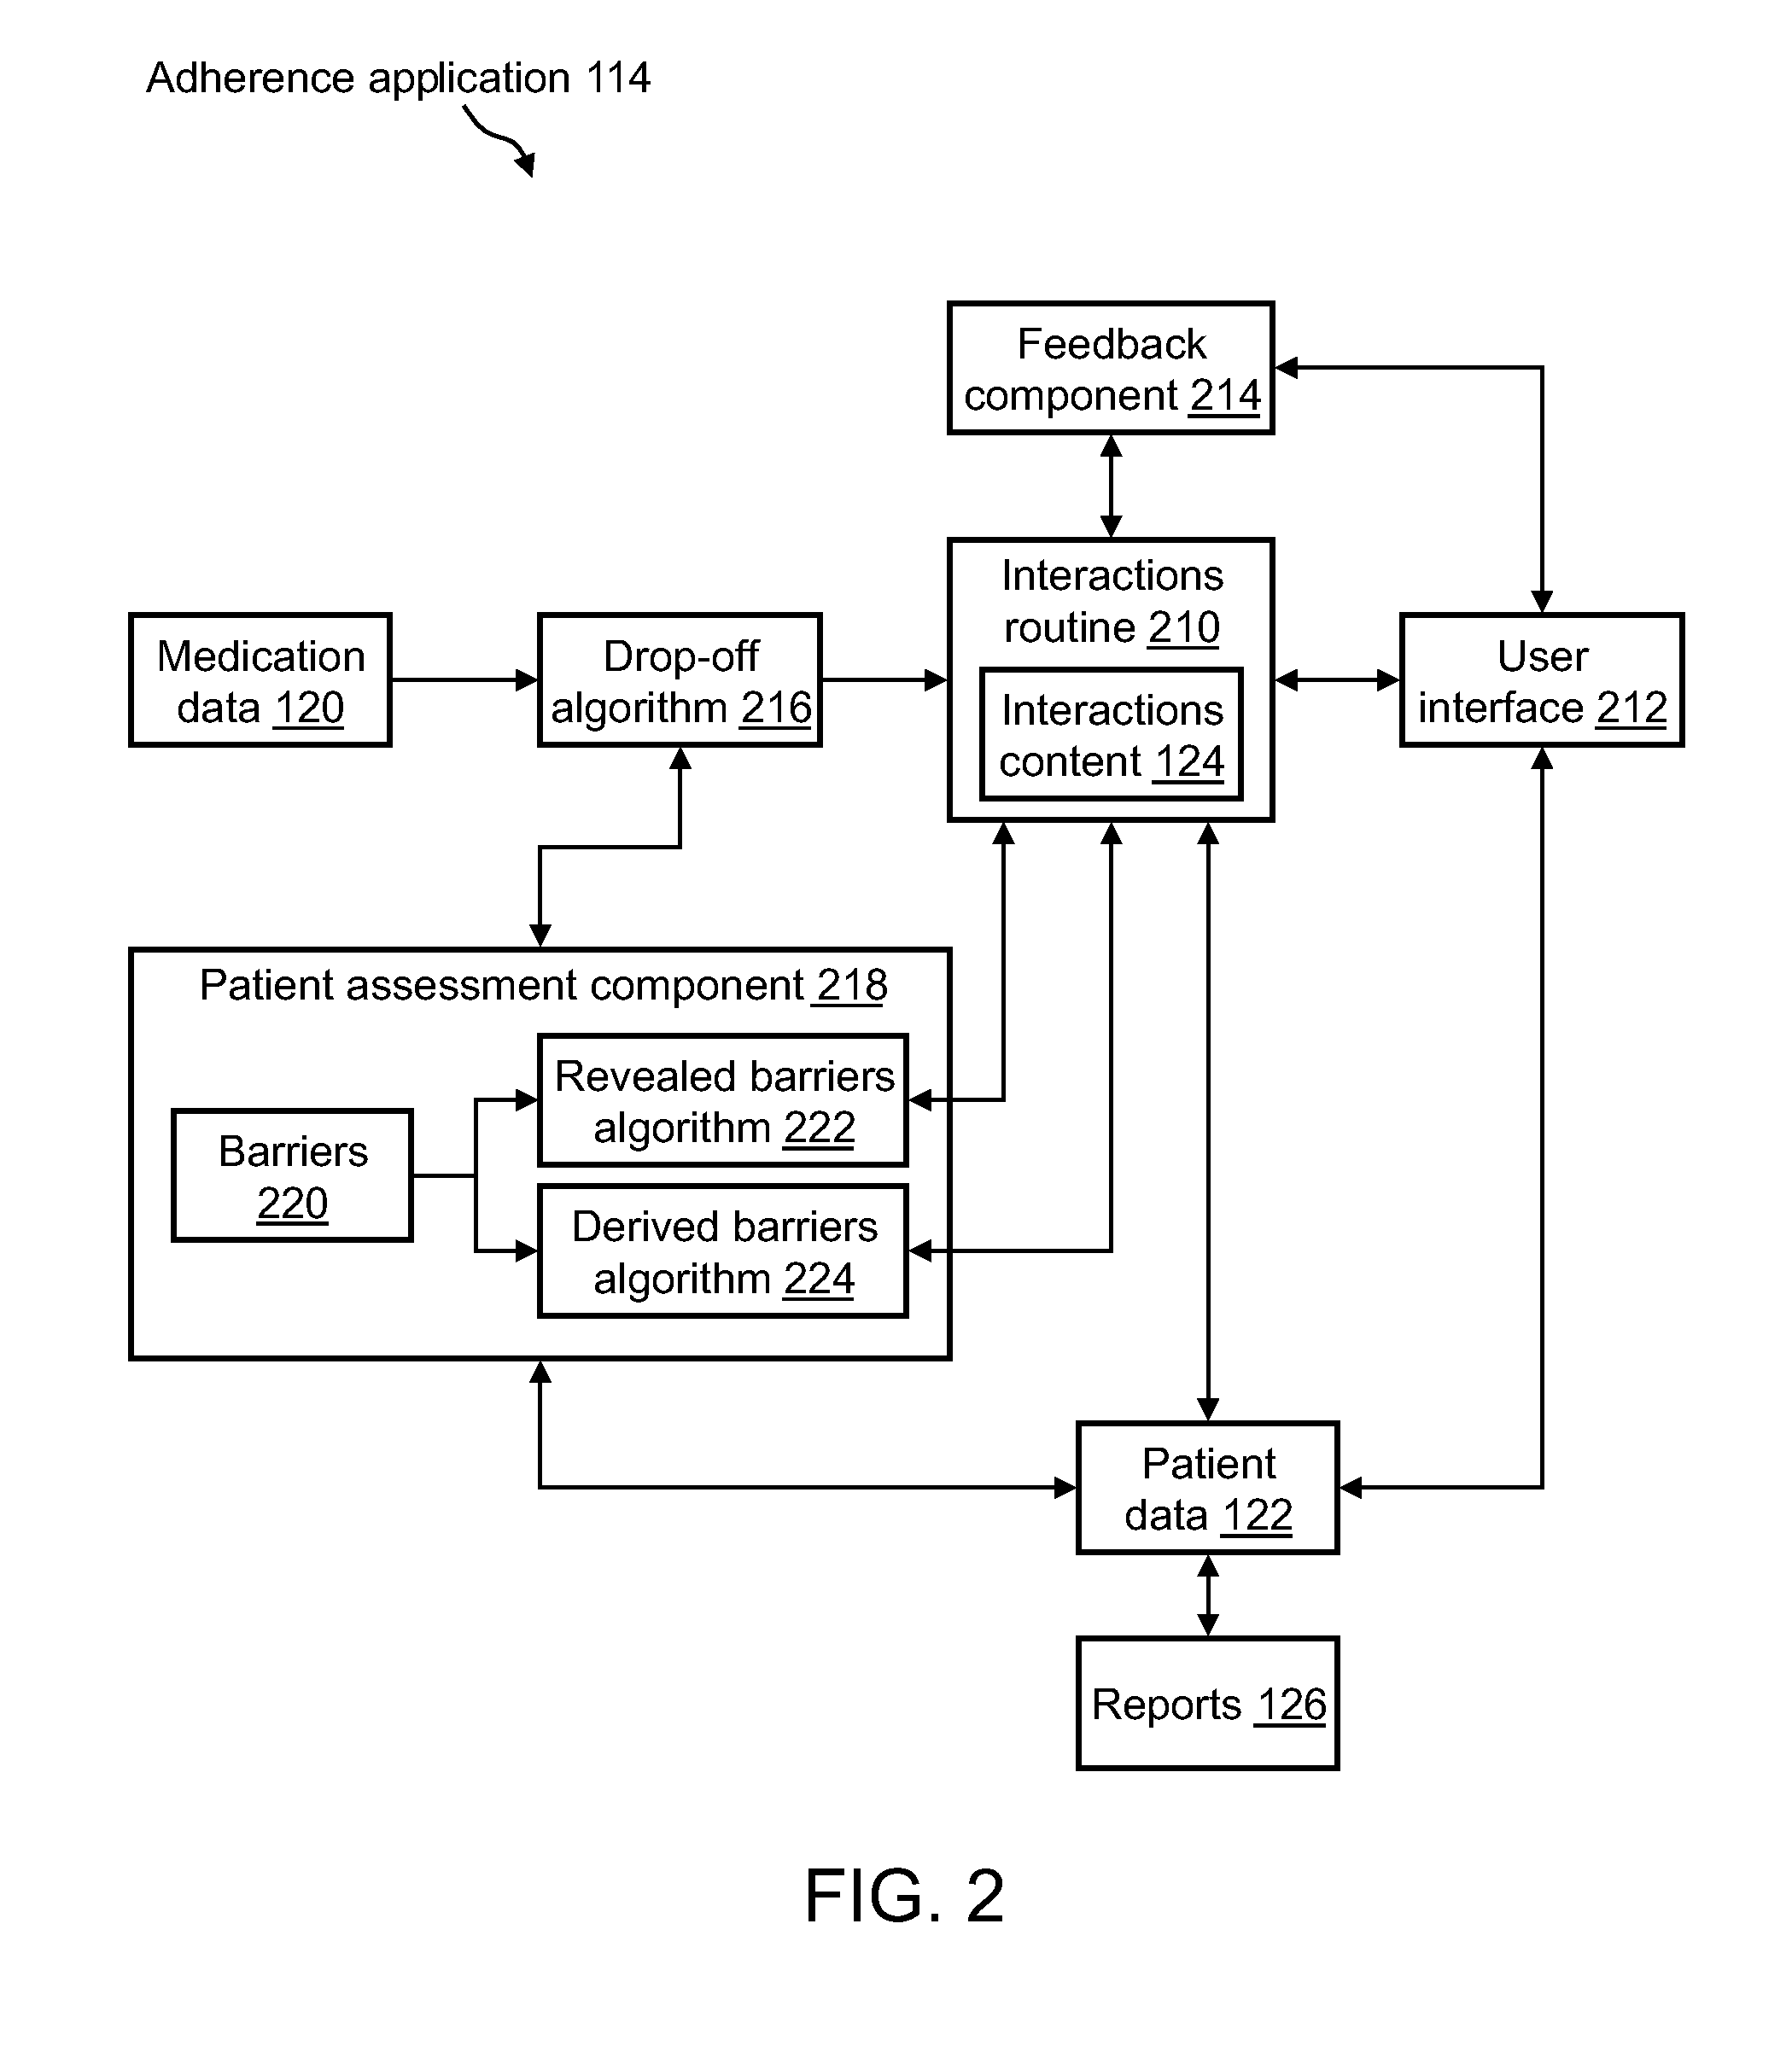 Medication Adherence System For And Method Of Facilitating An Automated Adherence Program